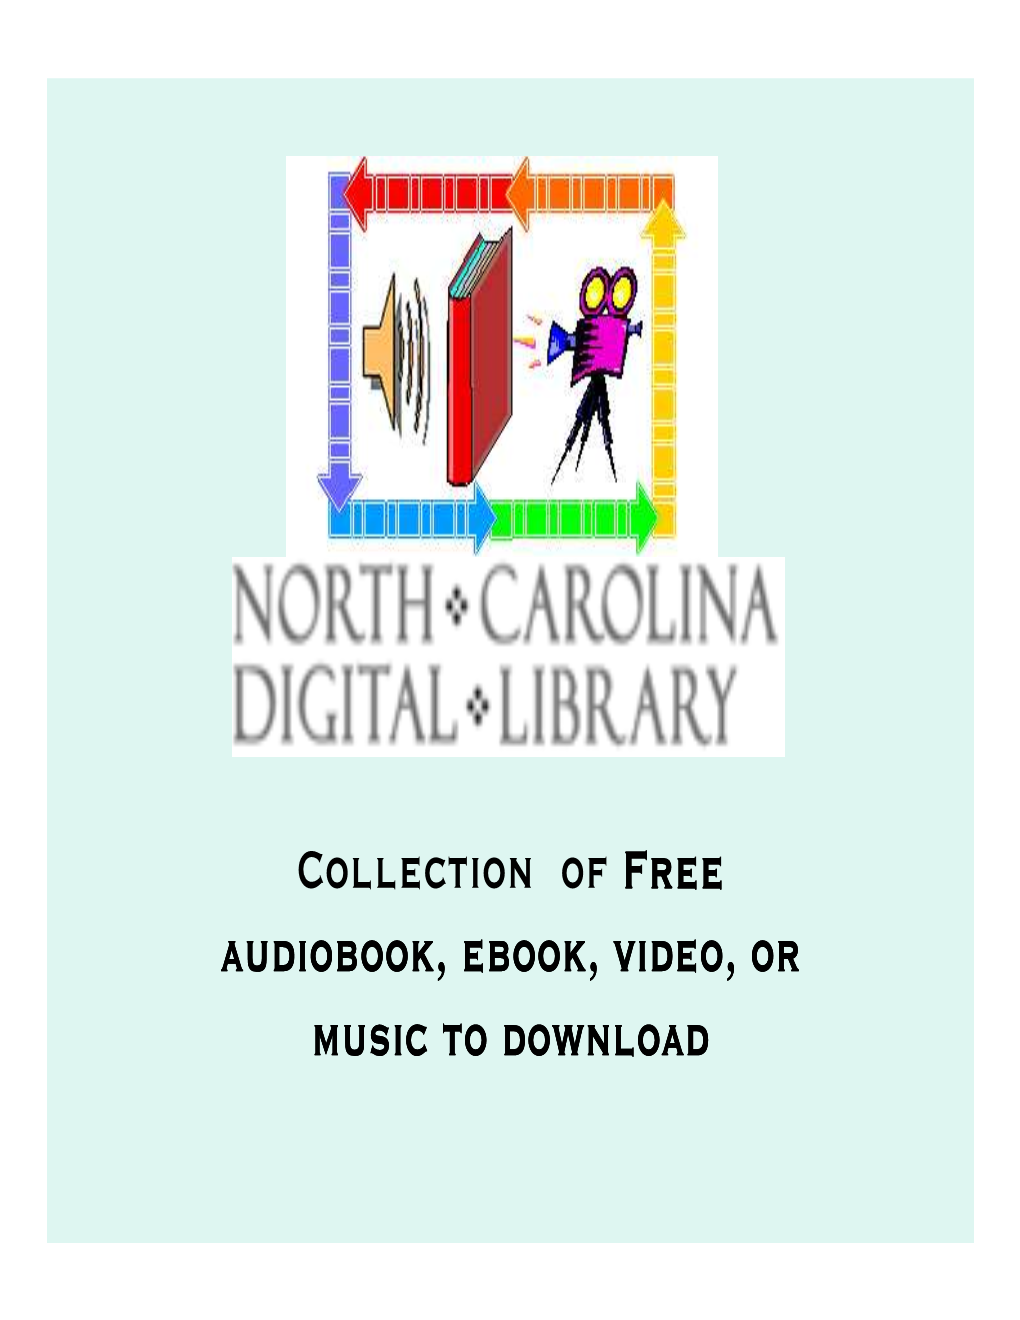 Collection of Free Audiobook Audiobook, Ebook, Video, Or , Video